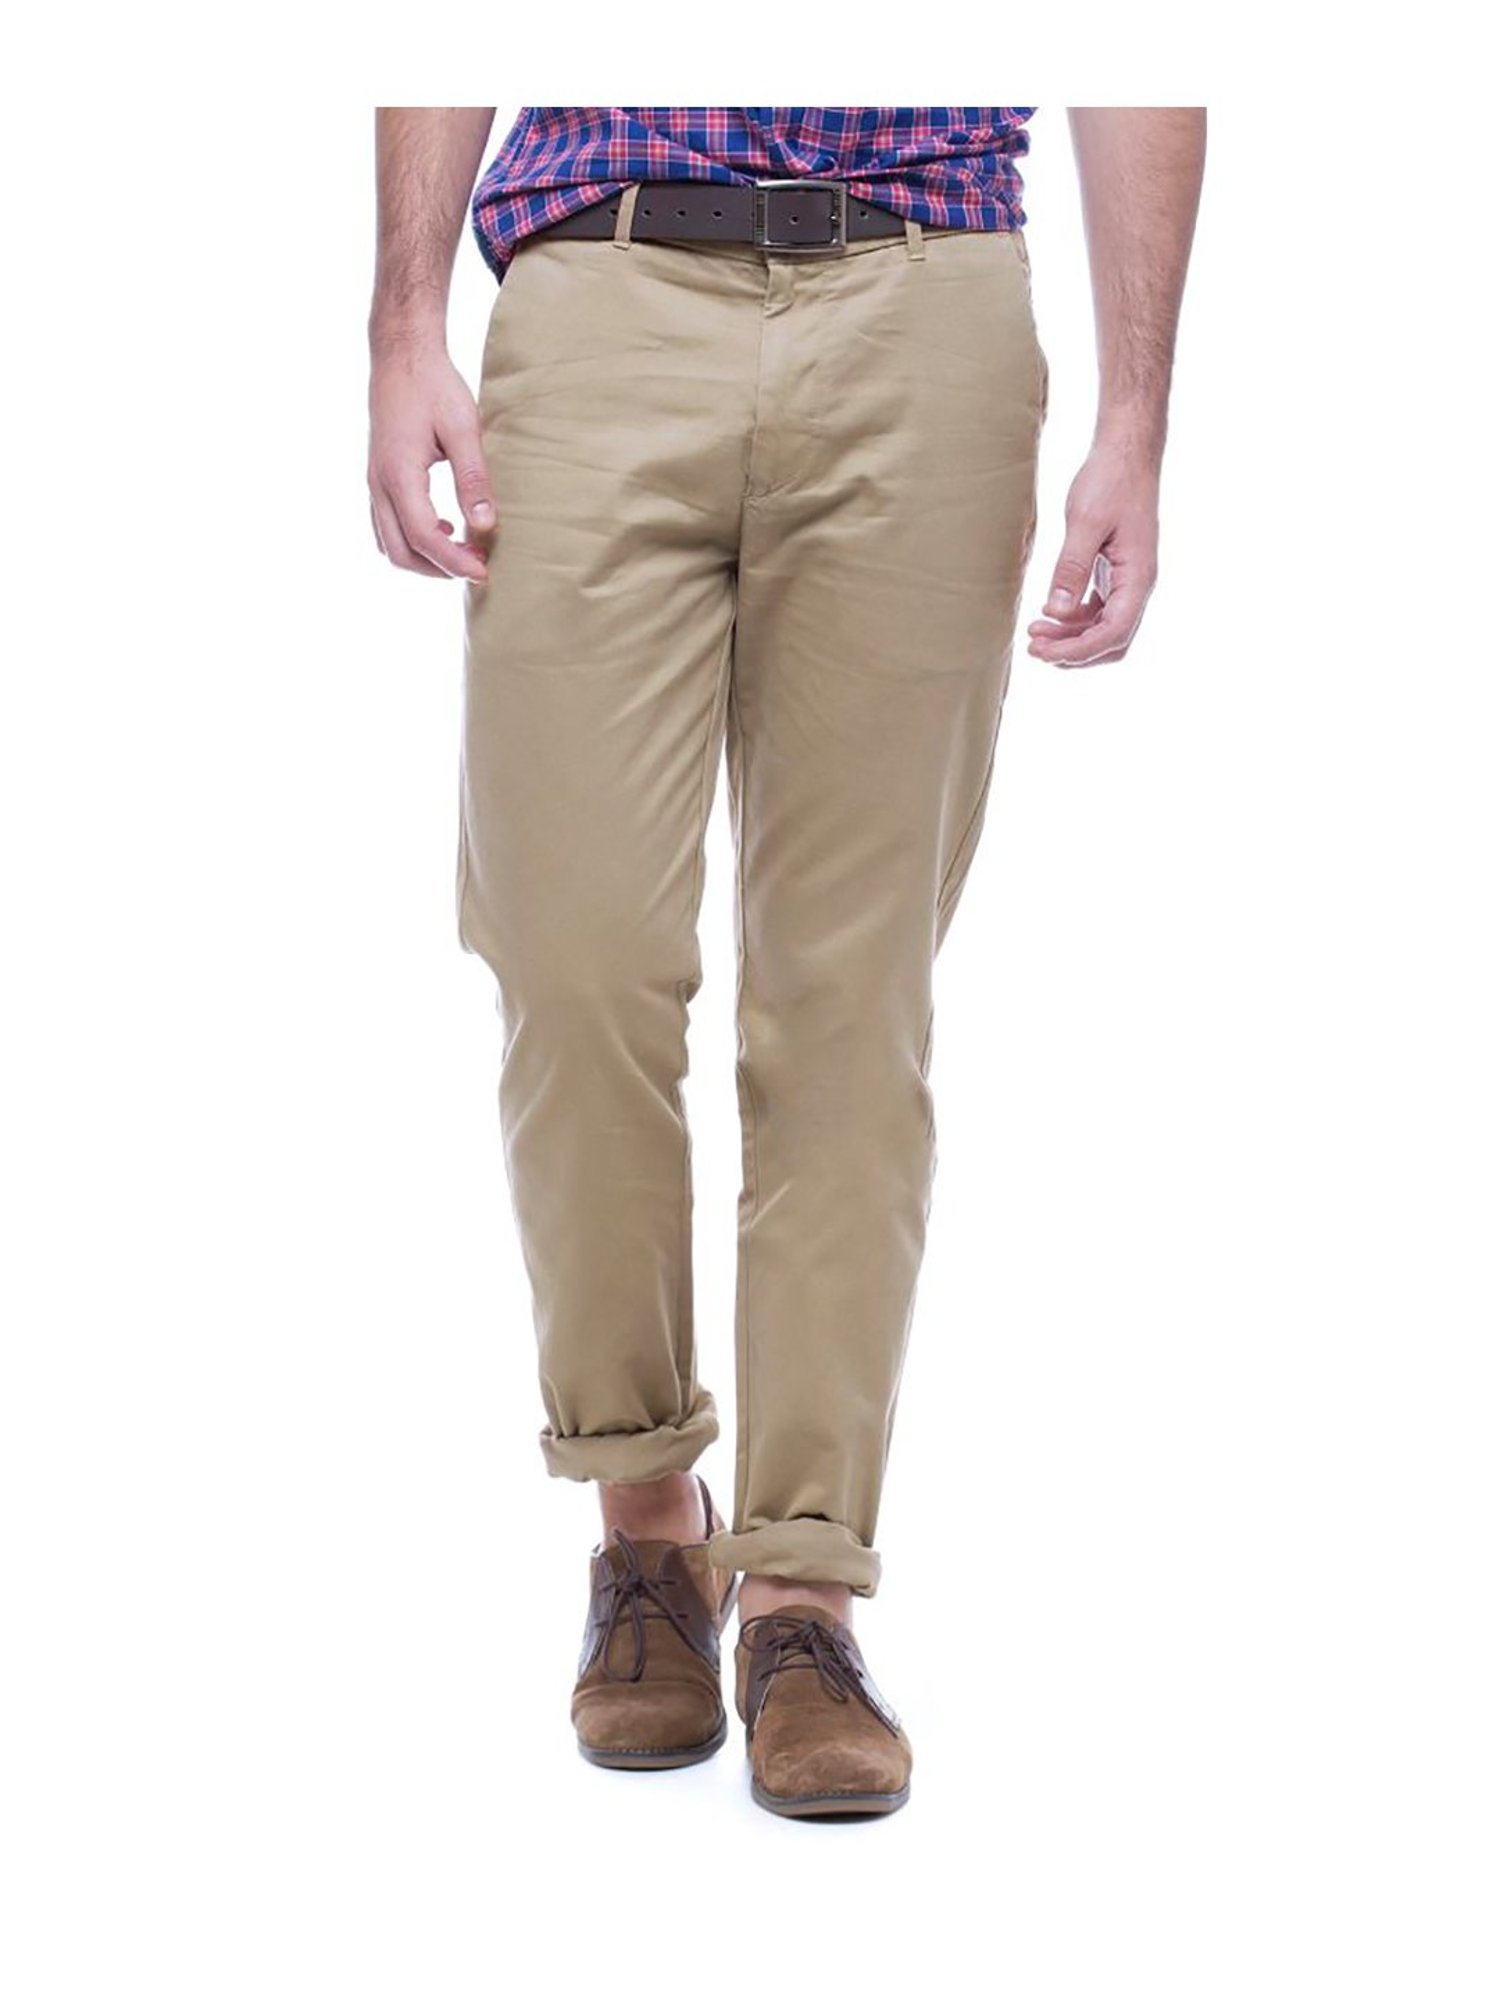 US POLO ASSN Casual Trousers  Buy US POLO ASSN Men Khaki Flat Front  Patterned Casual Trouser Online  Nykaa Fashion